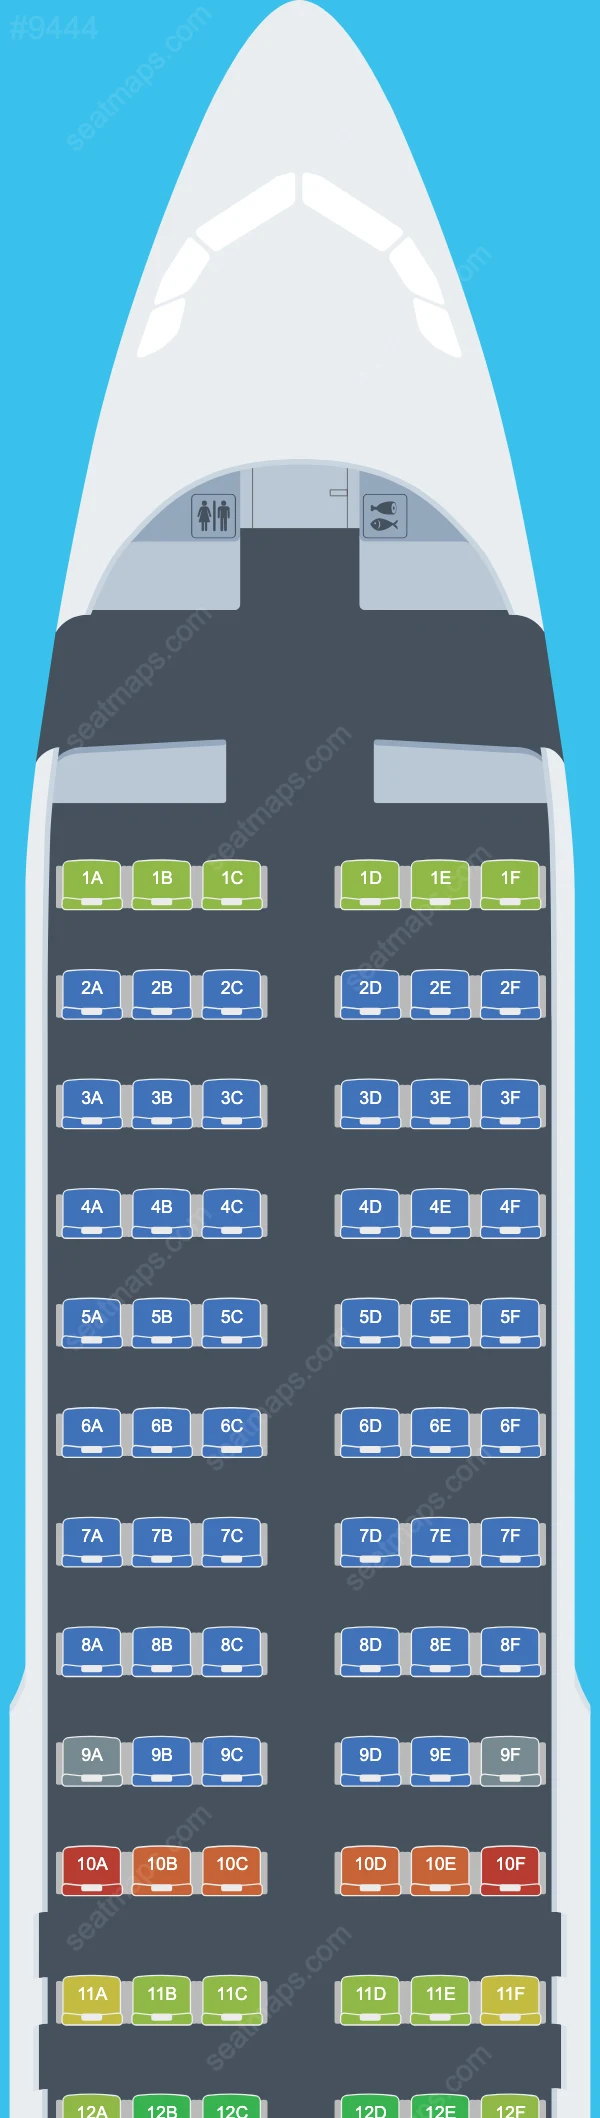 Atlantic Airways Airbus A320 Seat Maps A320-200neo